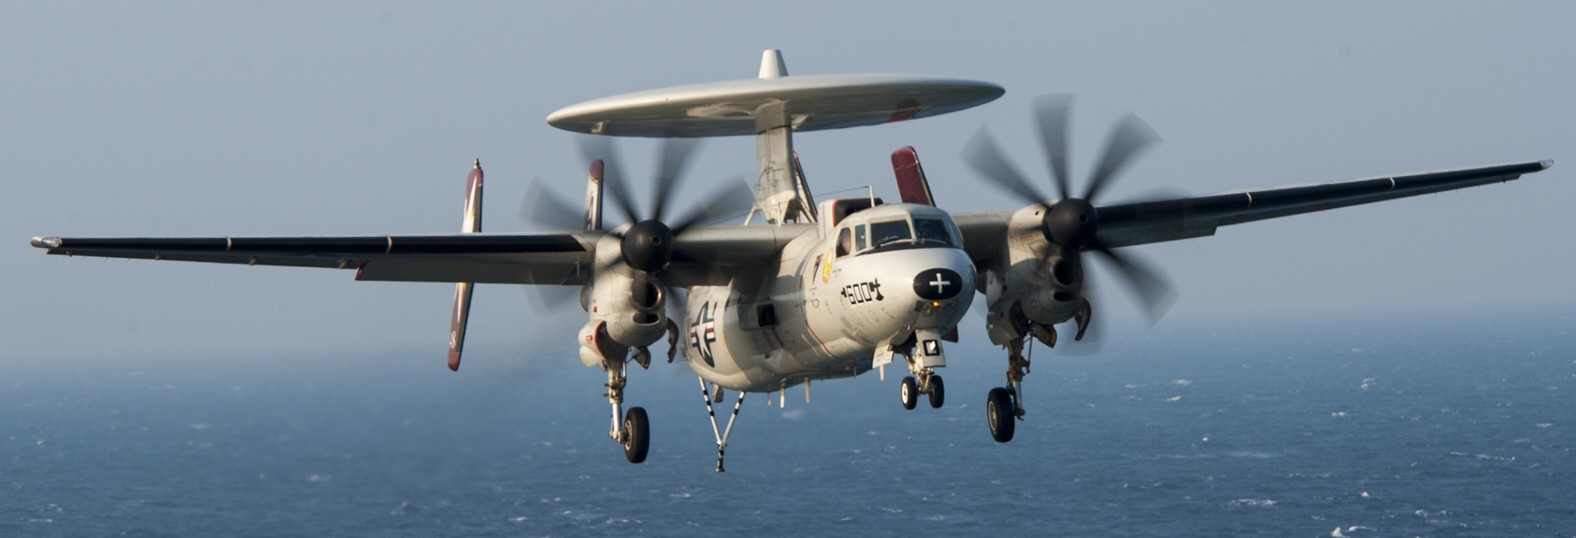 vaw-116 sun kings airborne command control squadron carrier early warning cvw-17 uss carl vinson cvn-70 43